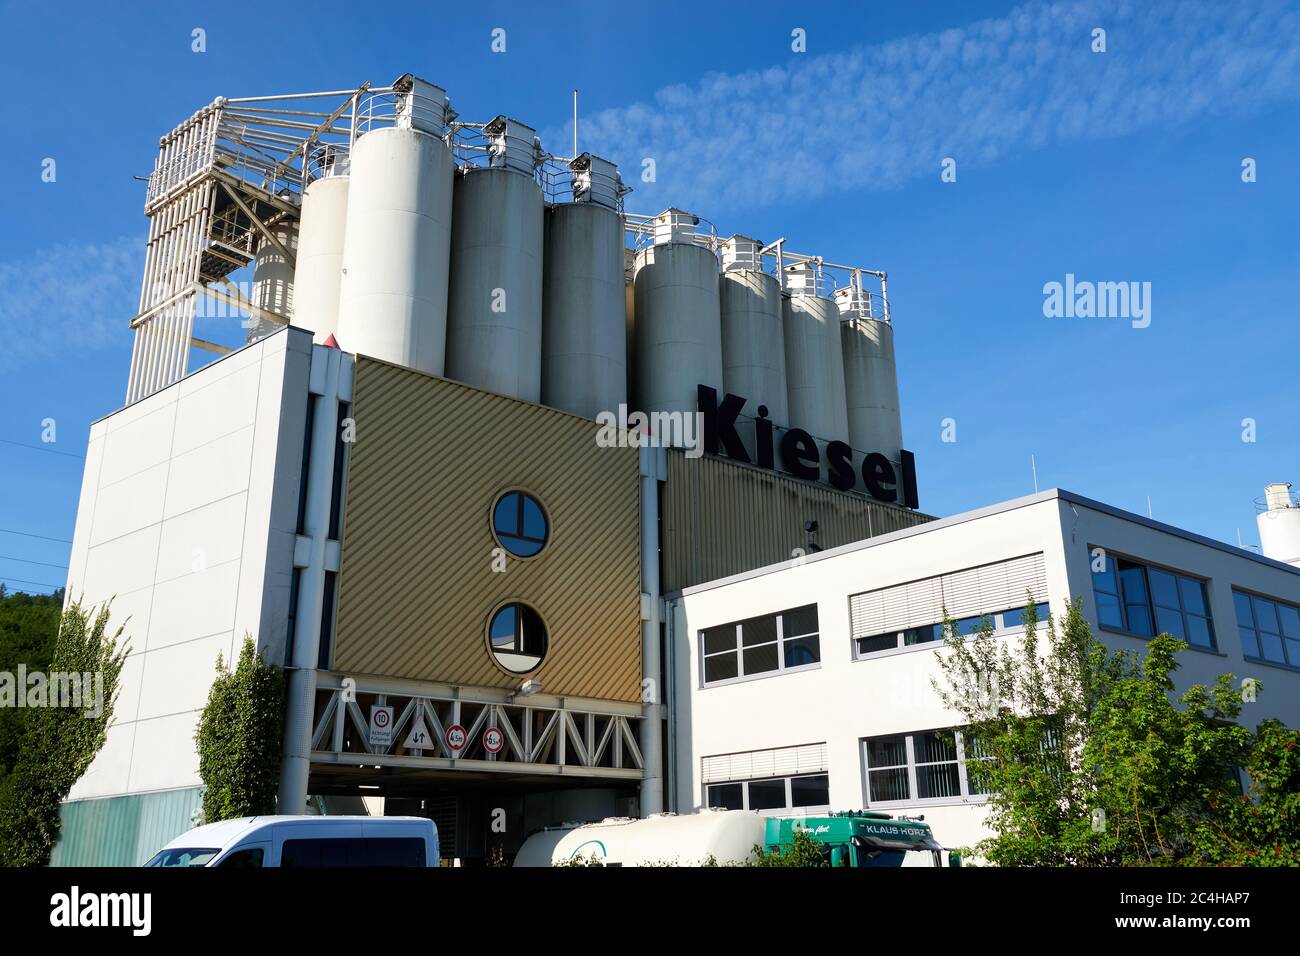 Esslingen, Germany - May 08, 2020: Kiesel construction chemistry ( Bauchemie ) We are convinced that all good things are yellow. Convince yourself. Stock Photo